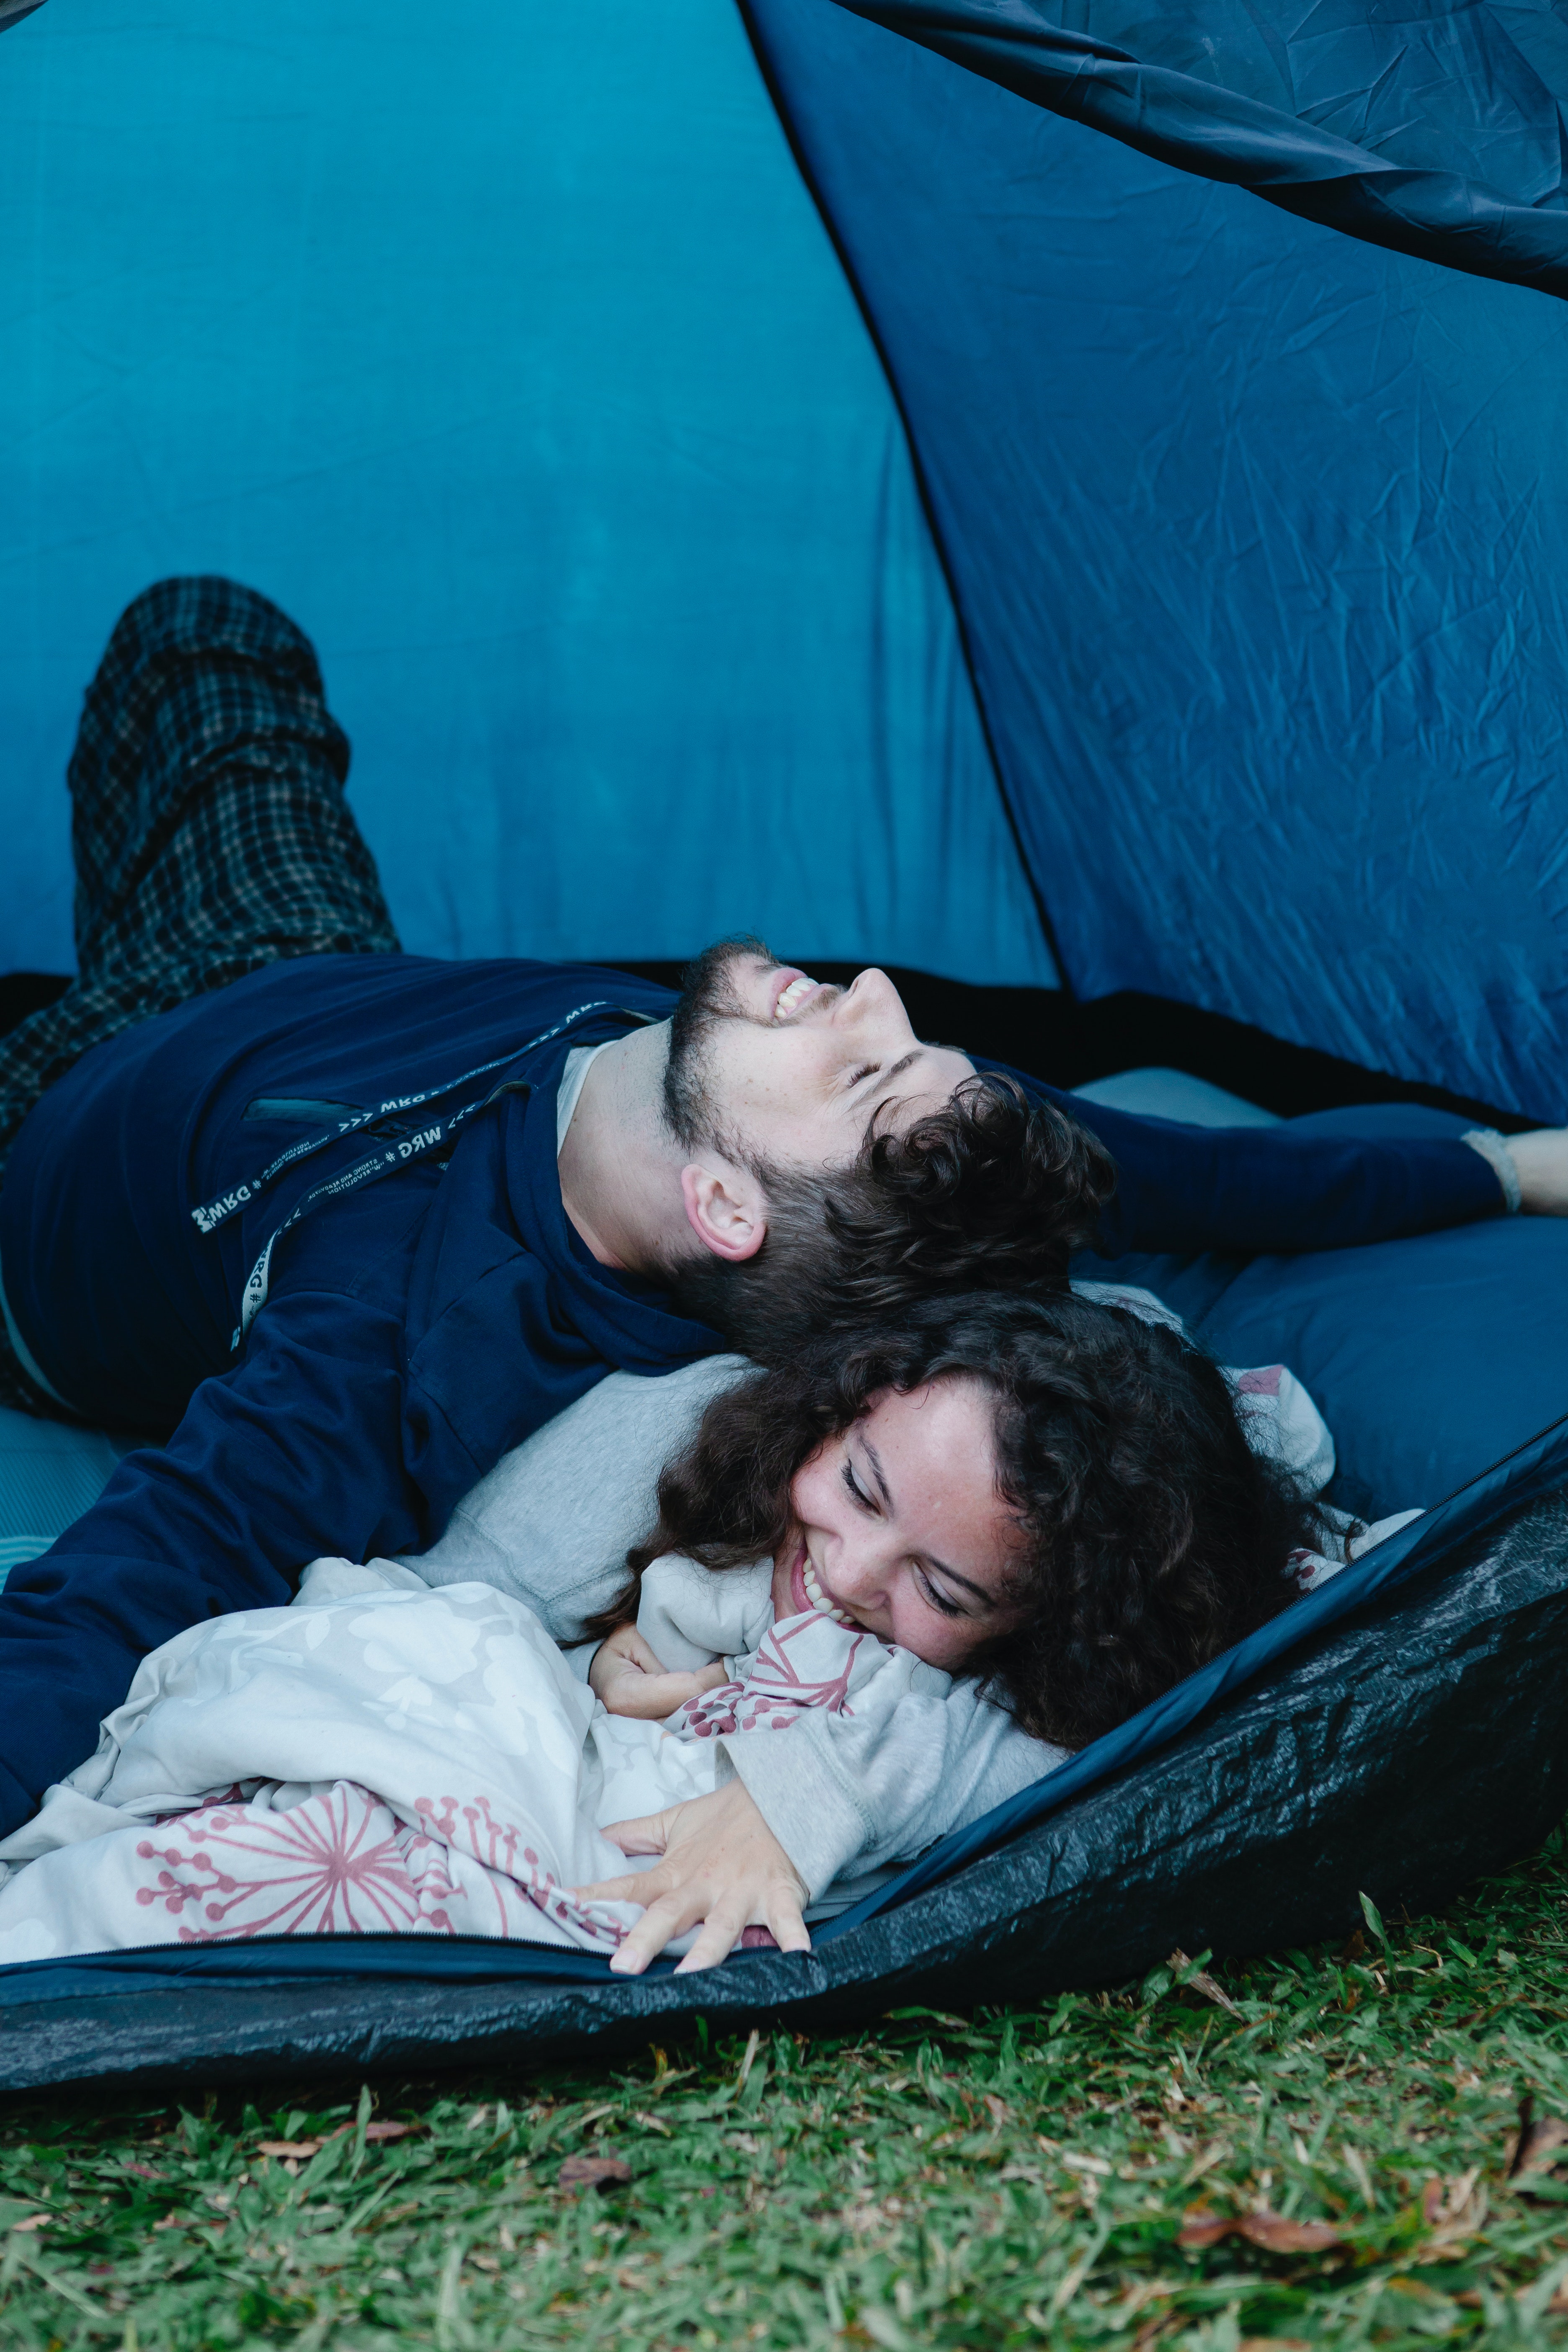 A couple in a tent together. | Source: Pexels